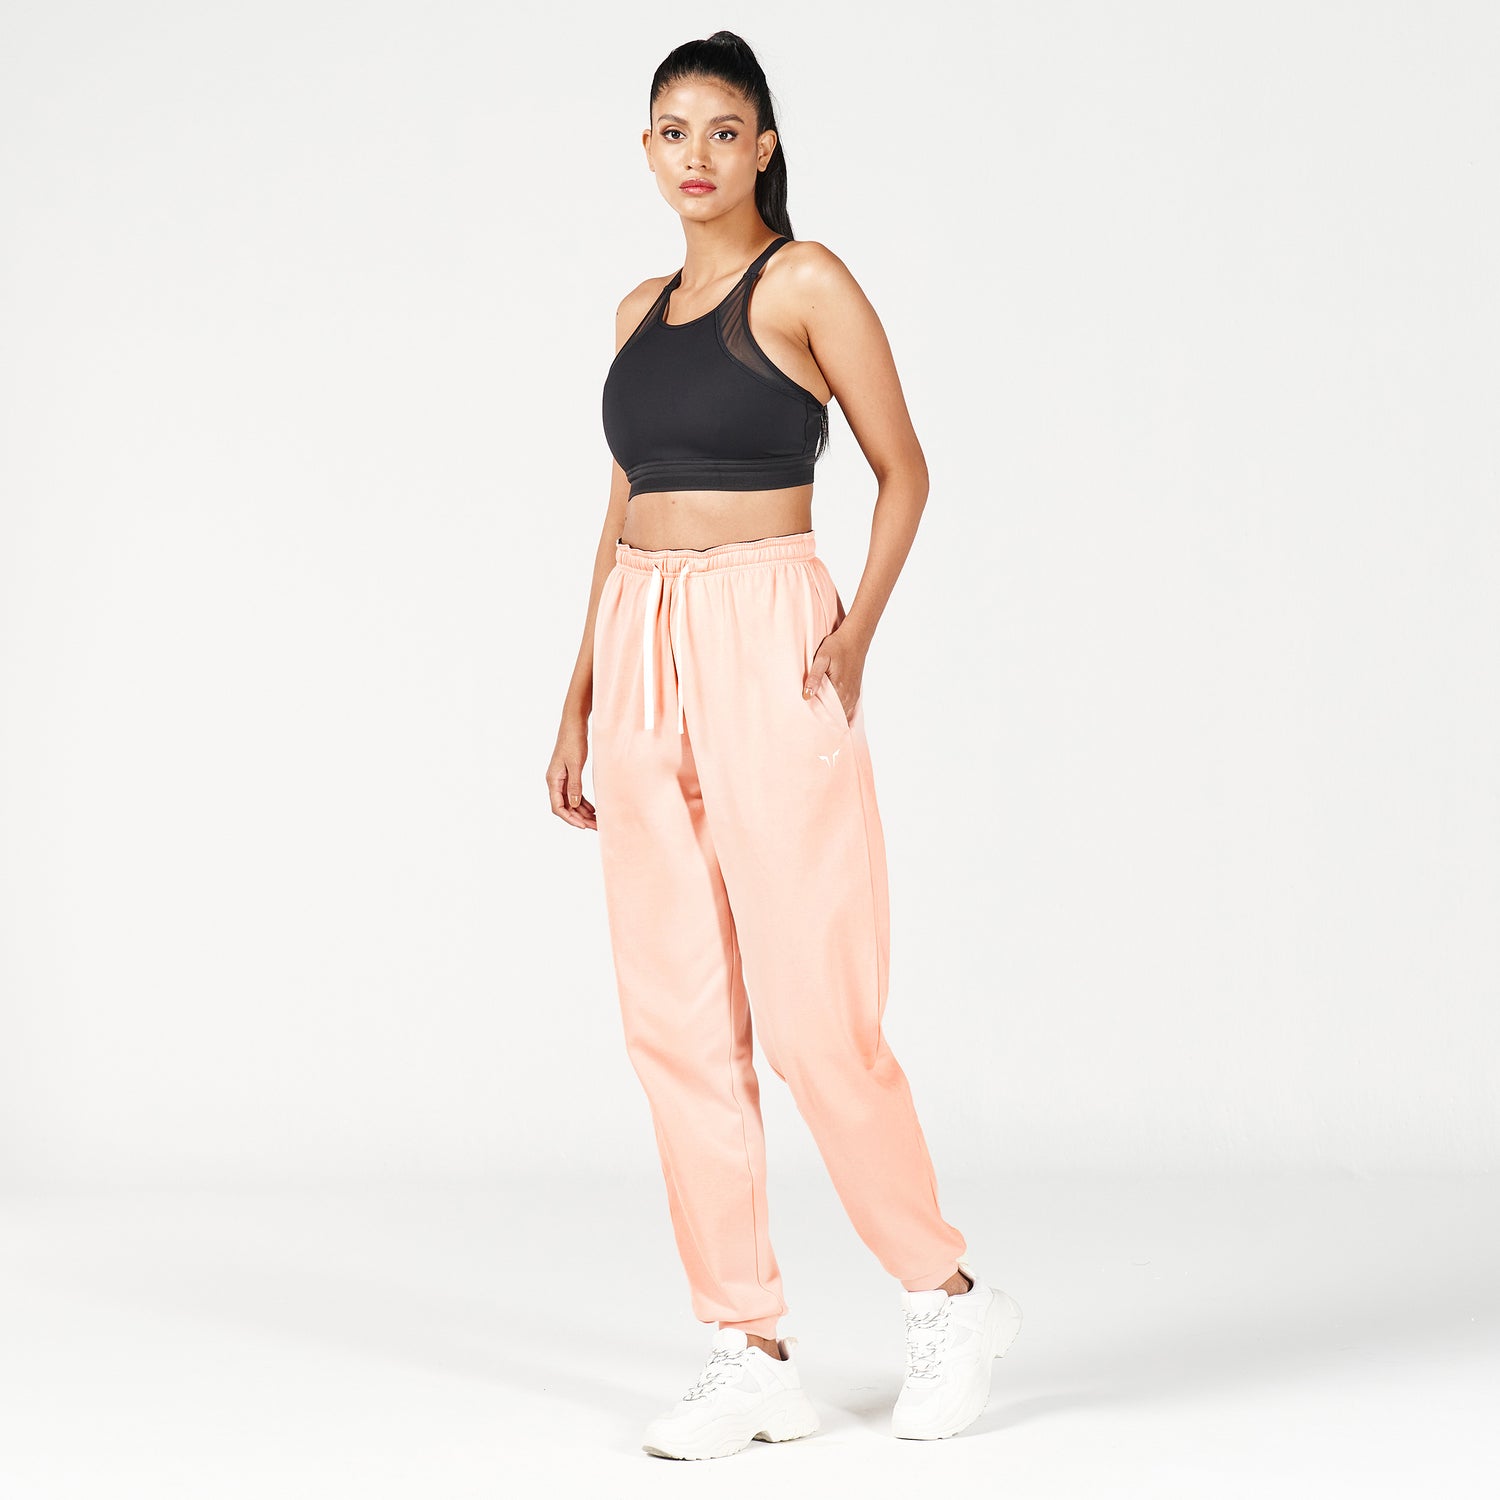 squatwolf-workout-clothes-waistband-surprise-joggers-pink-rose-gym-pants-for-women